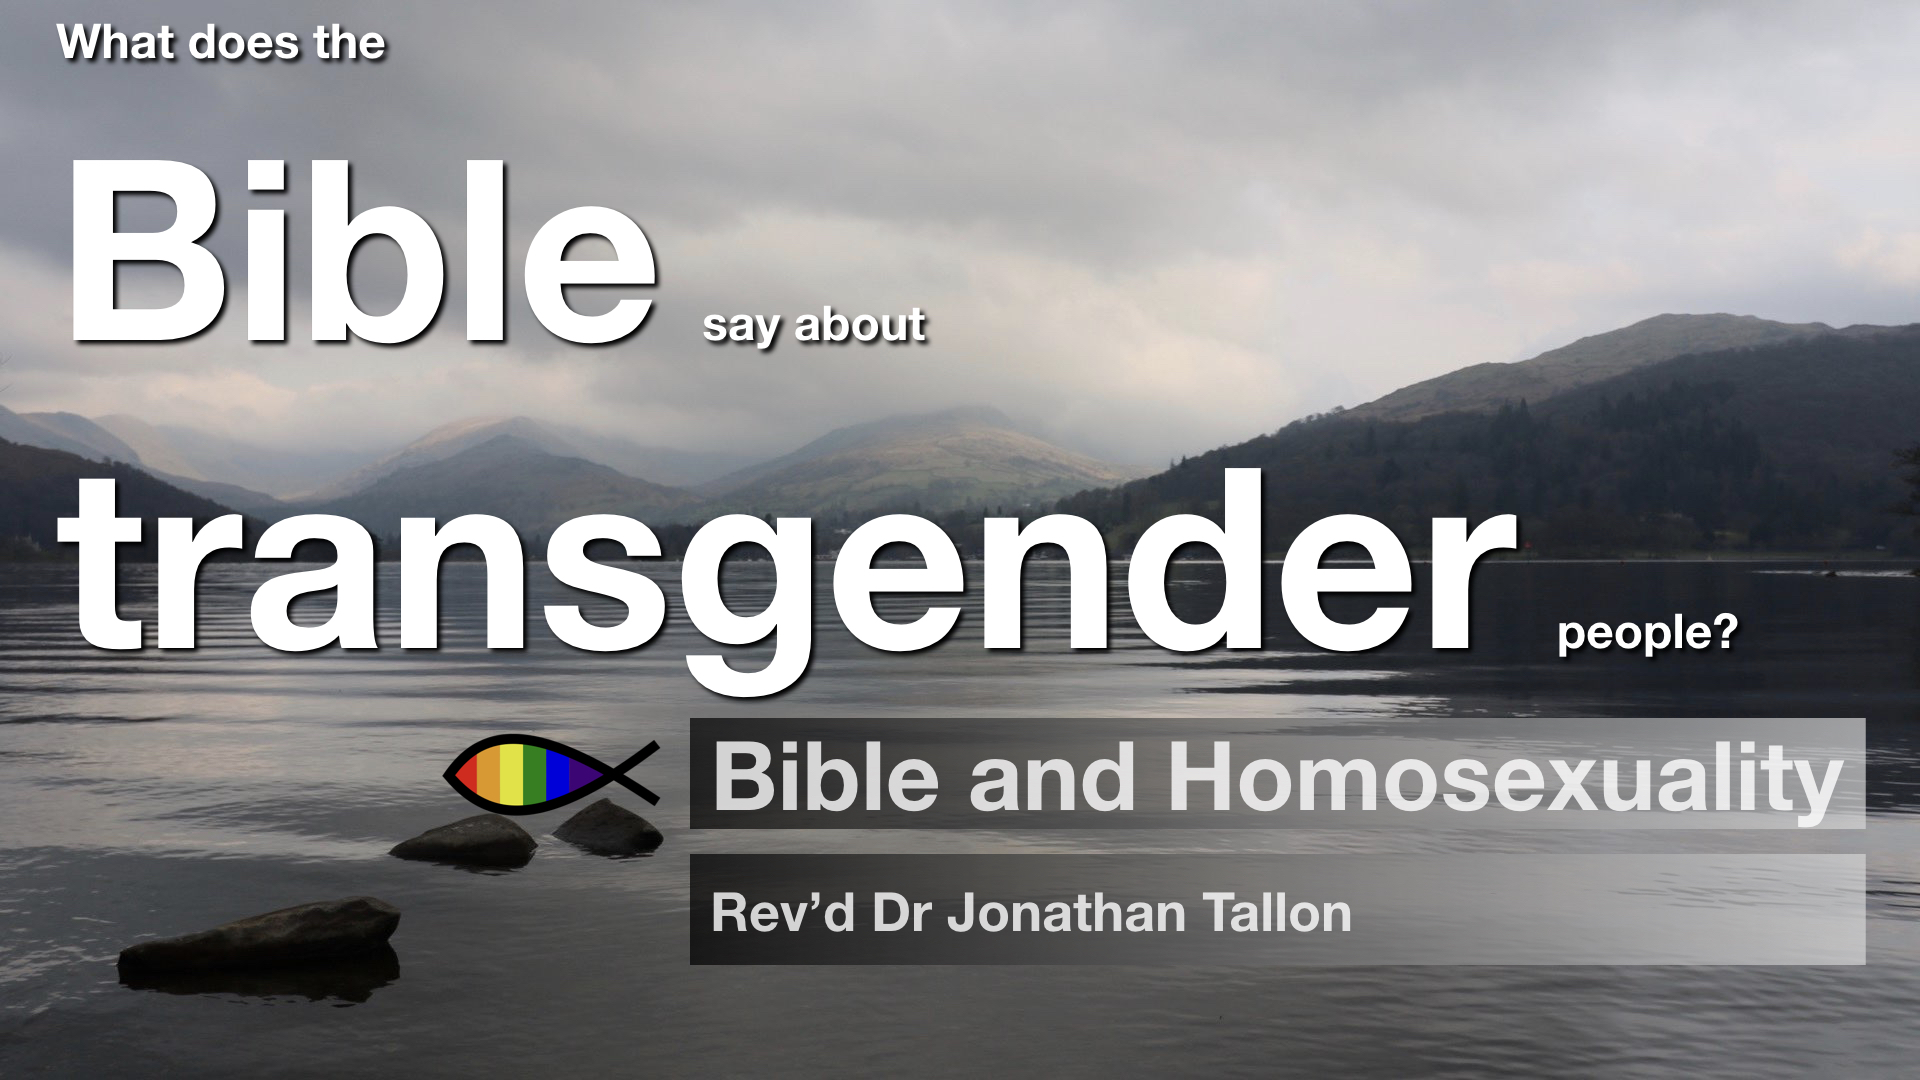 What does the Bible say about transgender people?